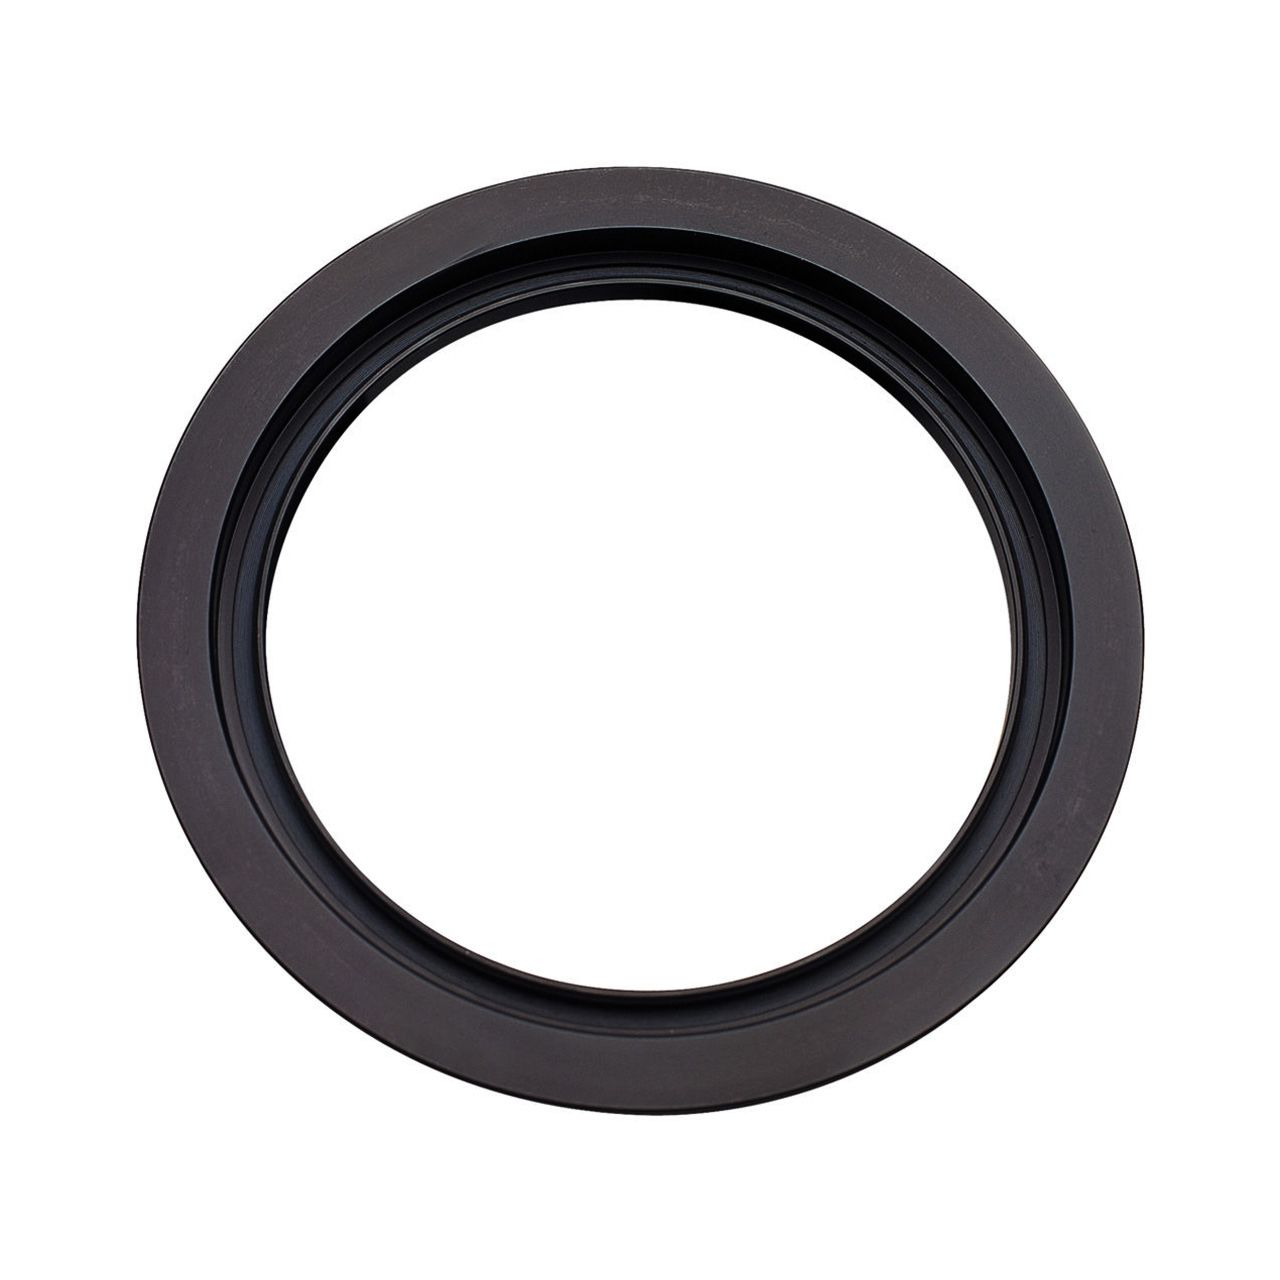 LEE Filters Standard Adapter Ring 55Mm